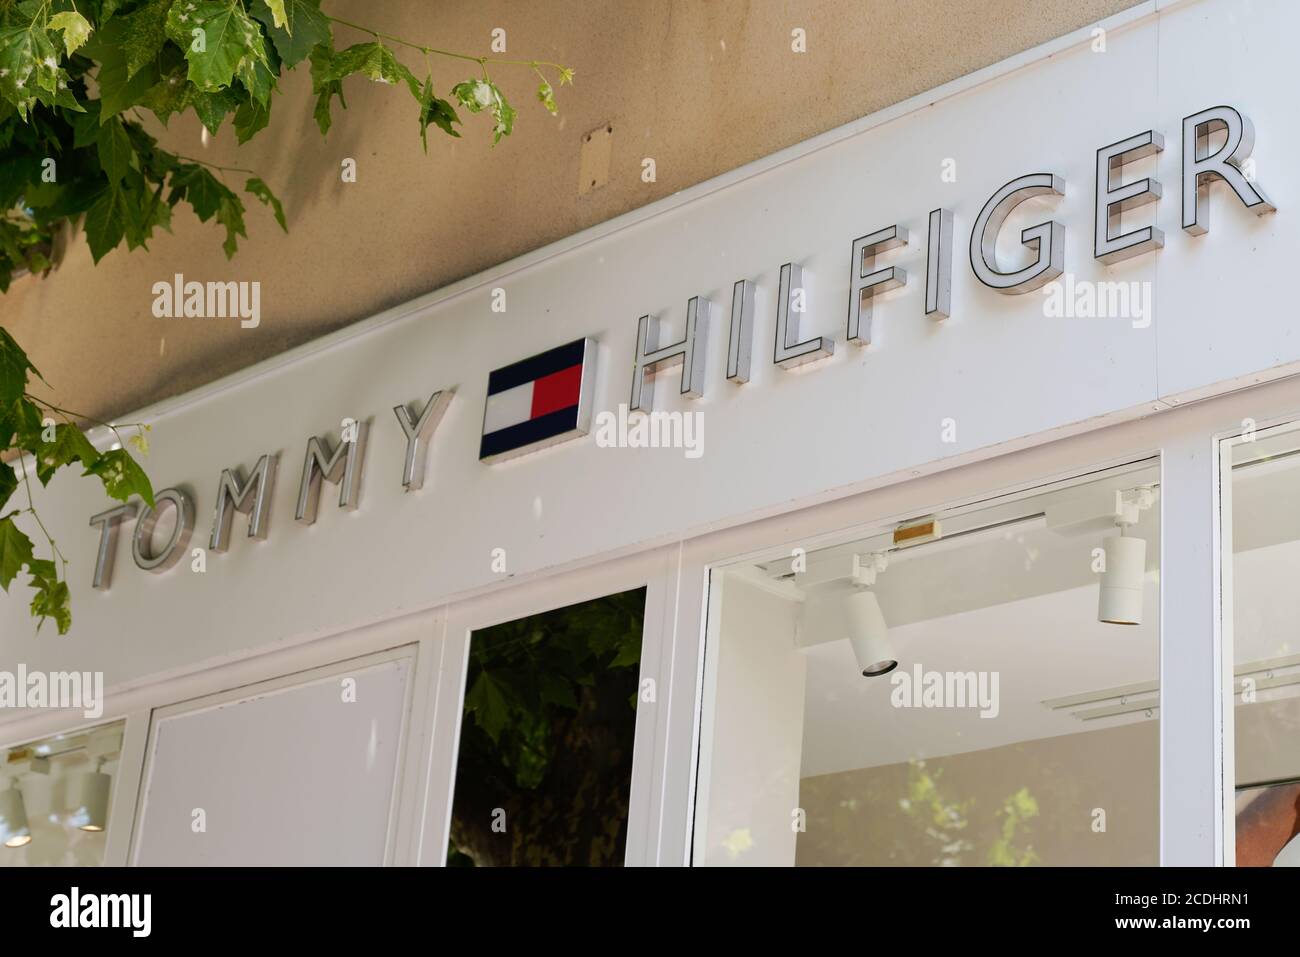 Bordeaux , Aquitaine / France - 08 25 2020 : Tommy Hilfiger sign and text  logo store front of American clothing company brand shop Stock Photo - Alamy